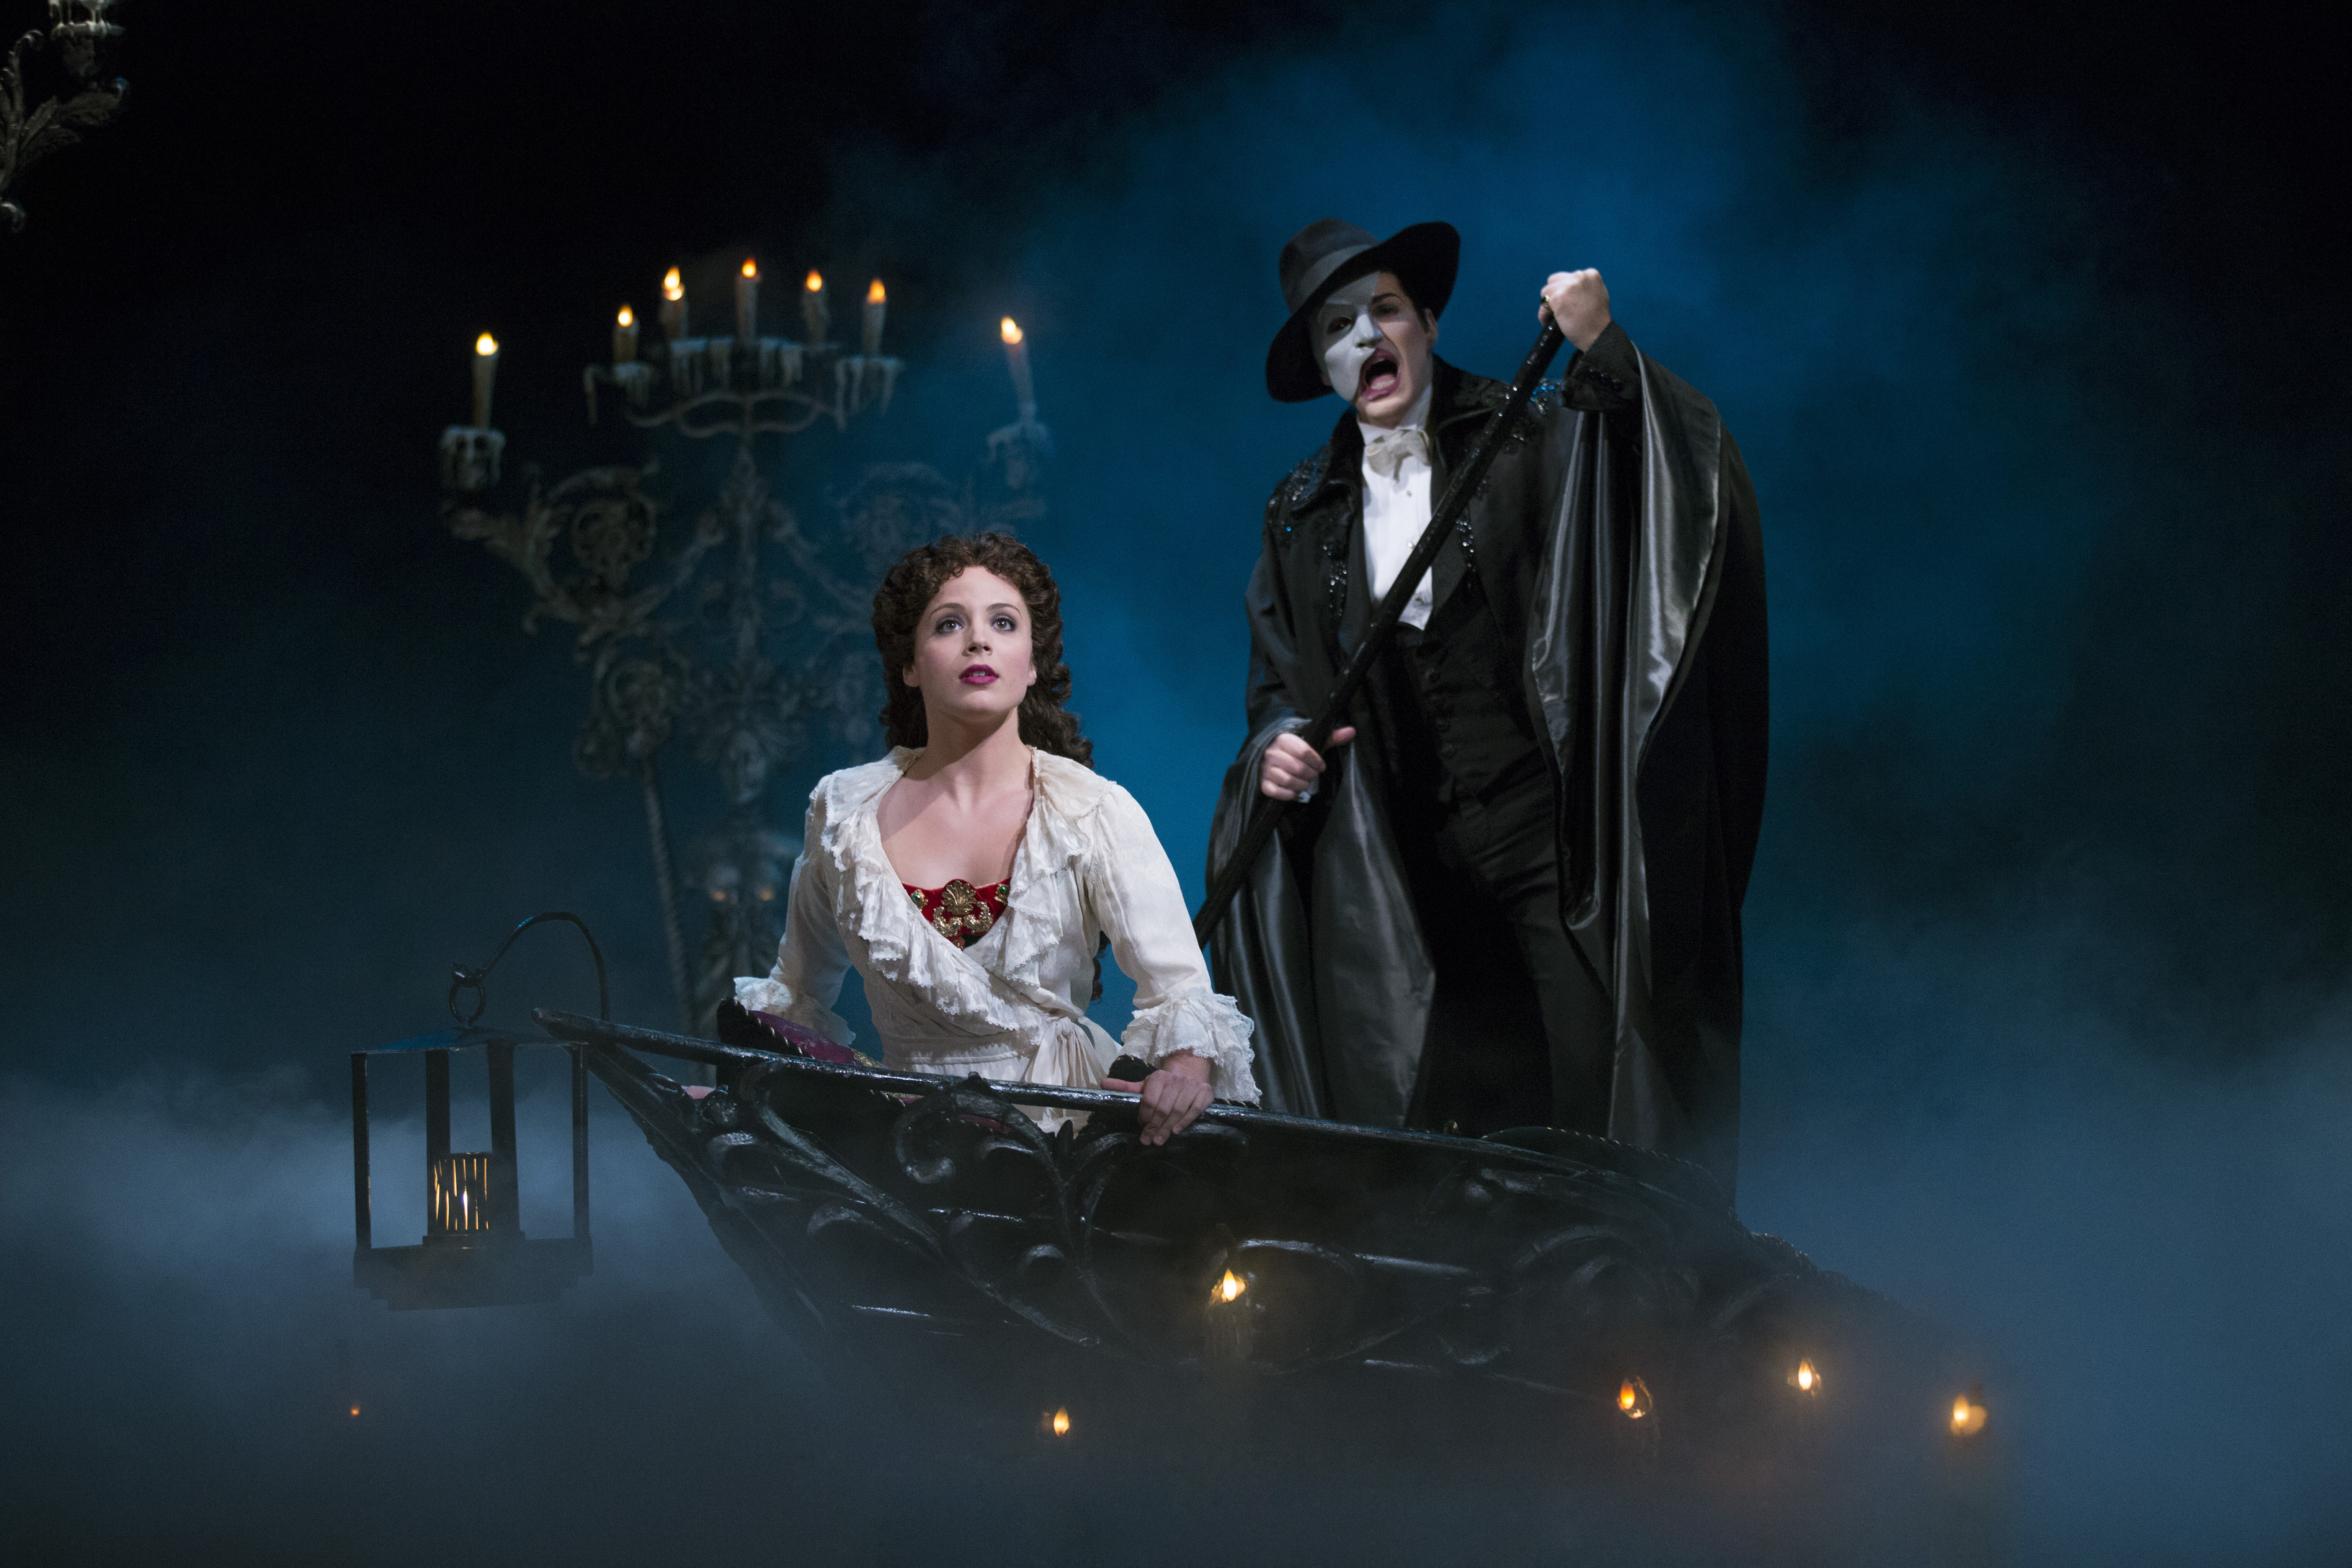 The Phantom Of The Opera Wallpapers Movie Hq The Phantom Of The Opera Pictures 4k Wallpapers 2019